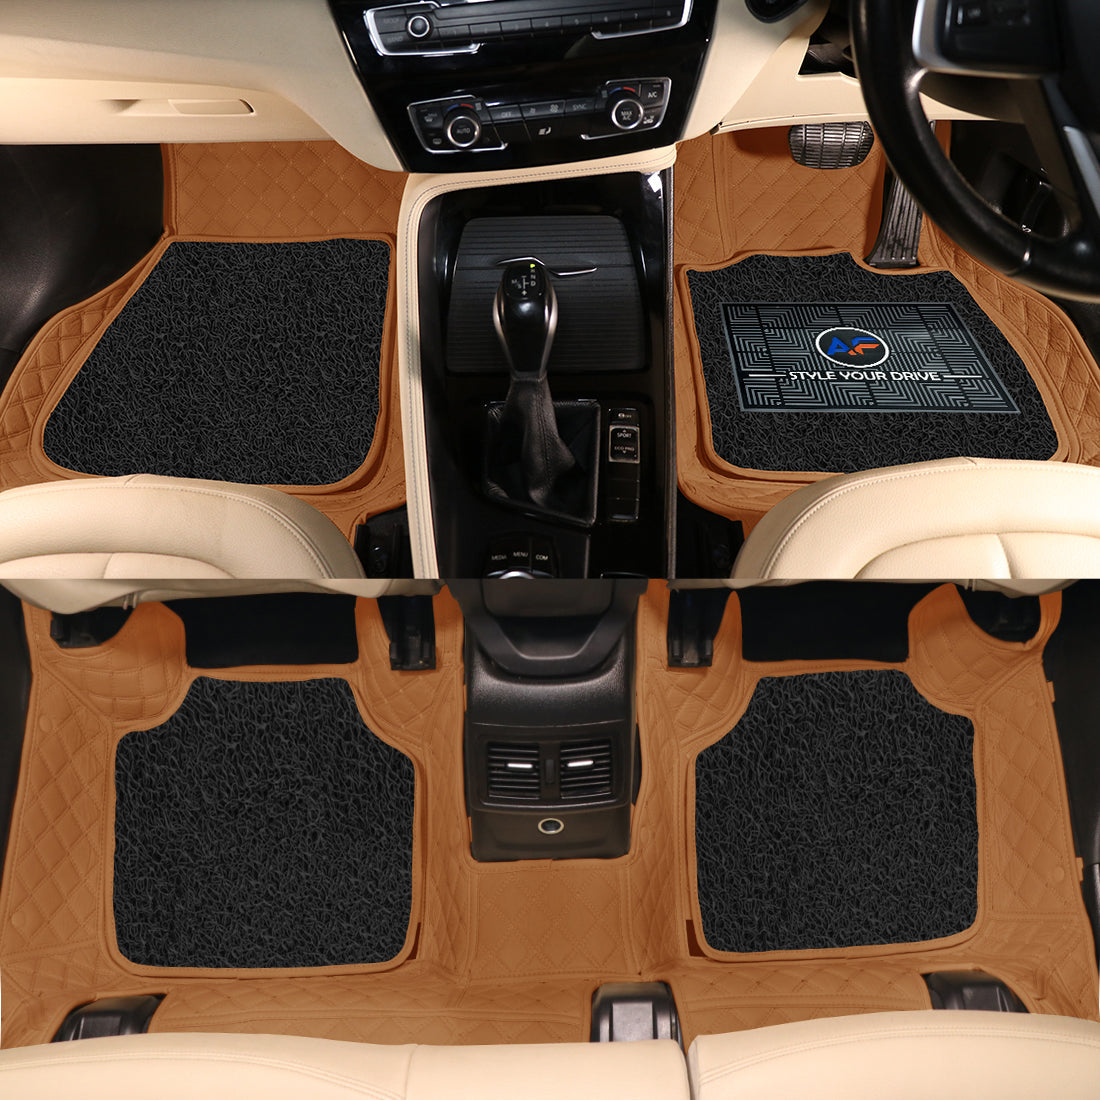 BMW X1 2016 7D Luxury Car Mat, All Weather Proof, Anti-Skid, 100% Waterproof & Odorless with Unique Diamond Fish Design (24mm Luxury PU Leather, 2 Rows)